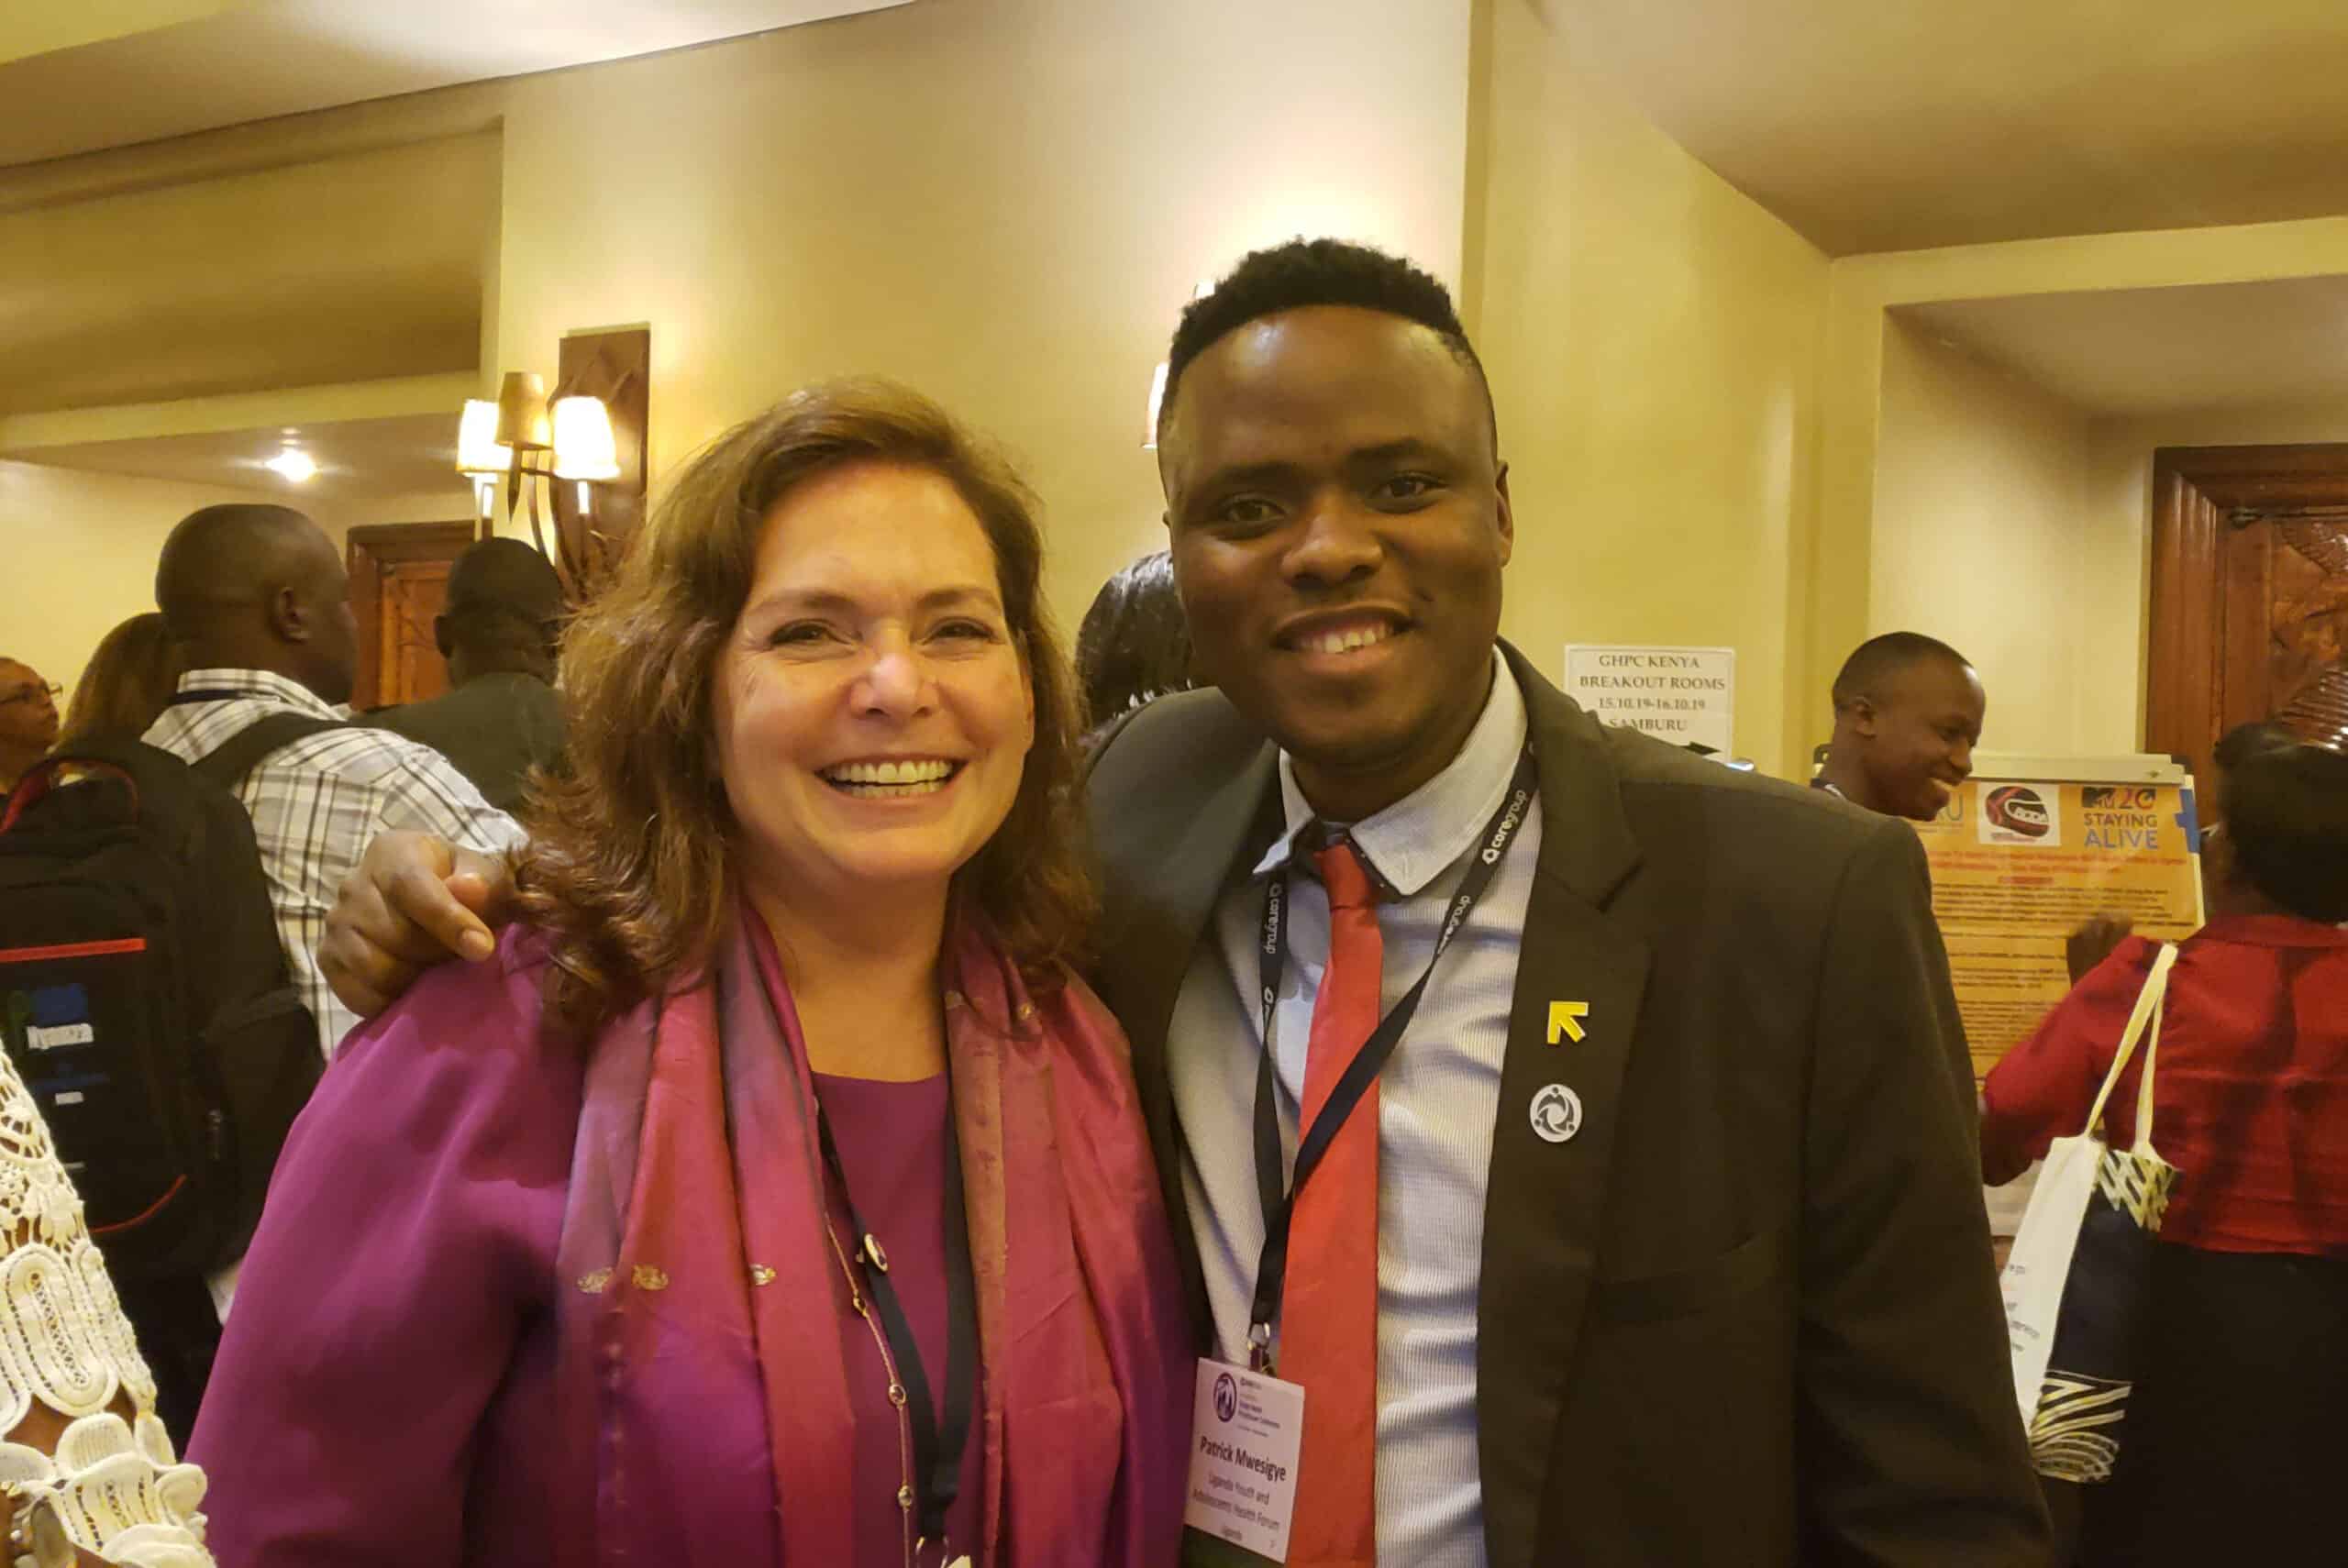 Lisa Hilmi and Patrick Mwesige at the Global Health Practitioner Conference held in Kenya in 2019.